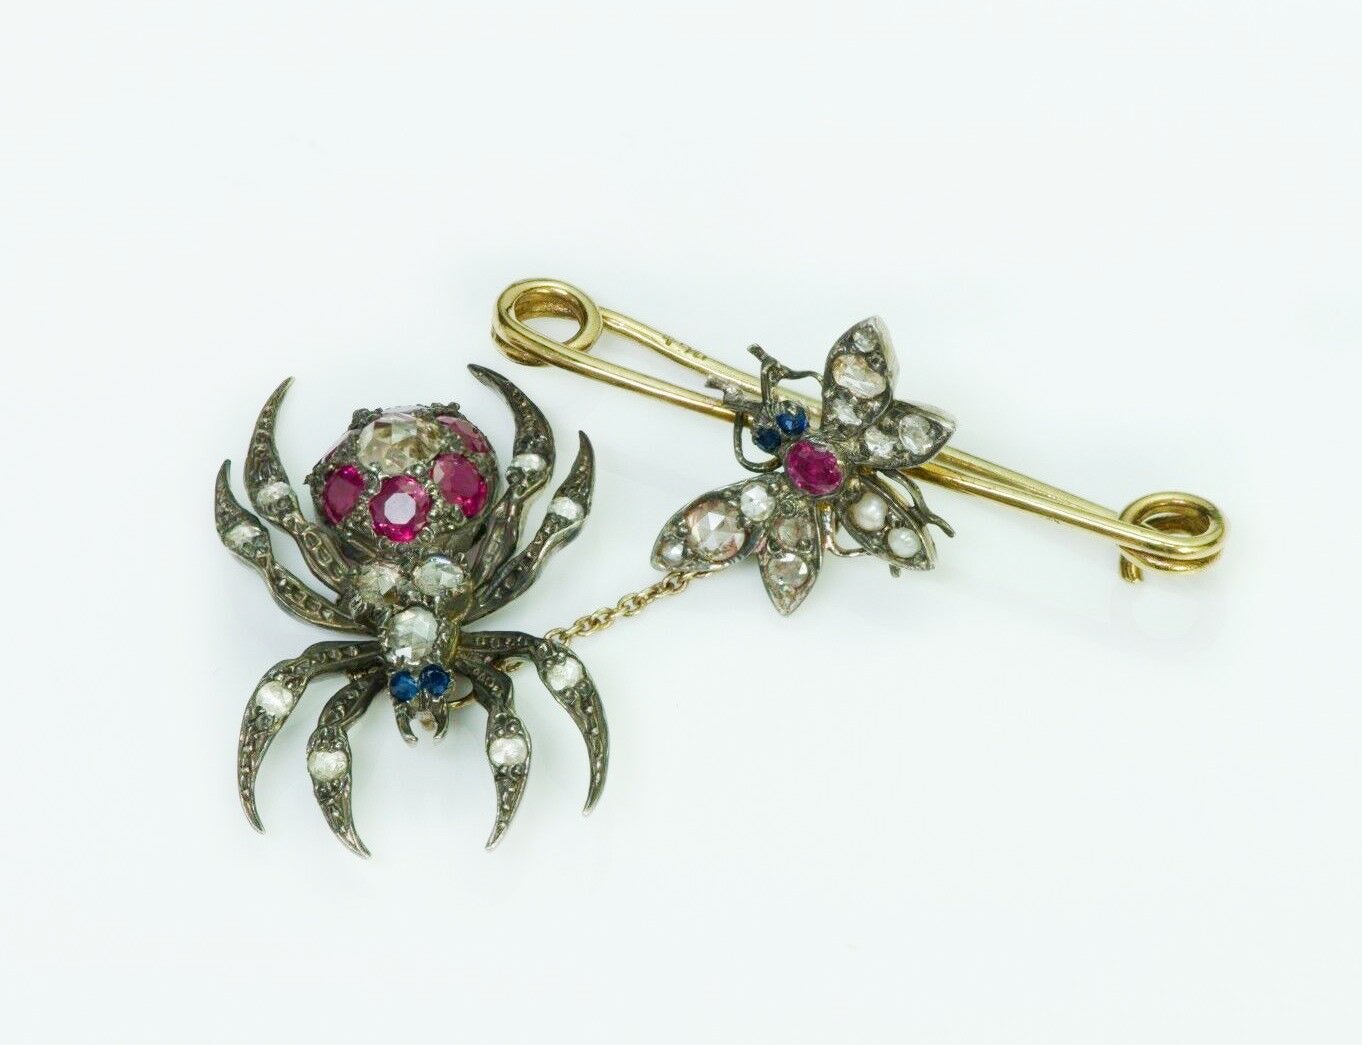 Antique Spider & Fly Yellow Gold Rose Cut Diamond Brooch Pin